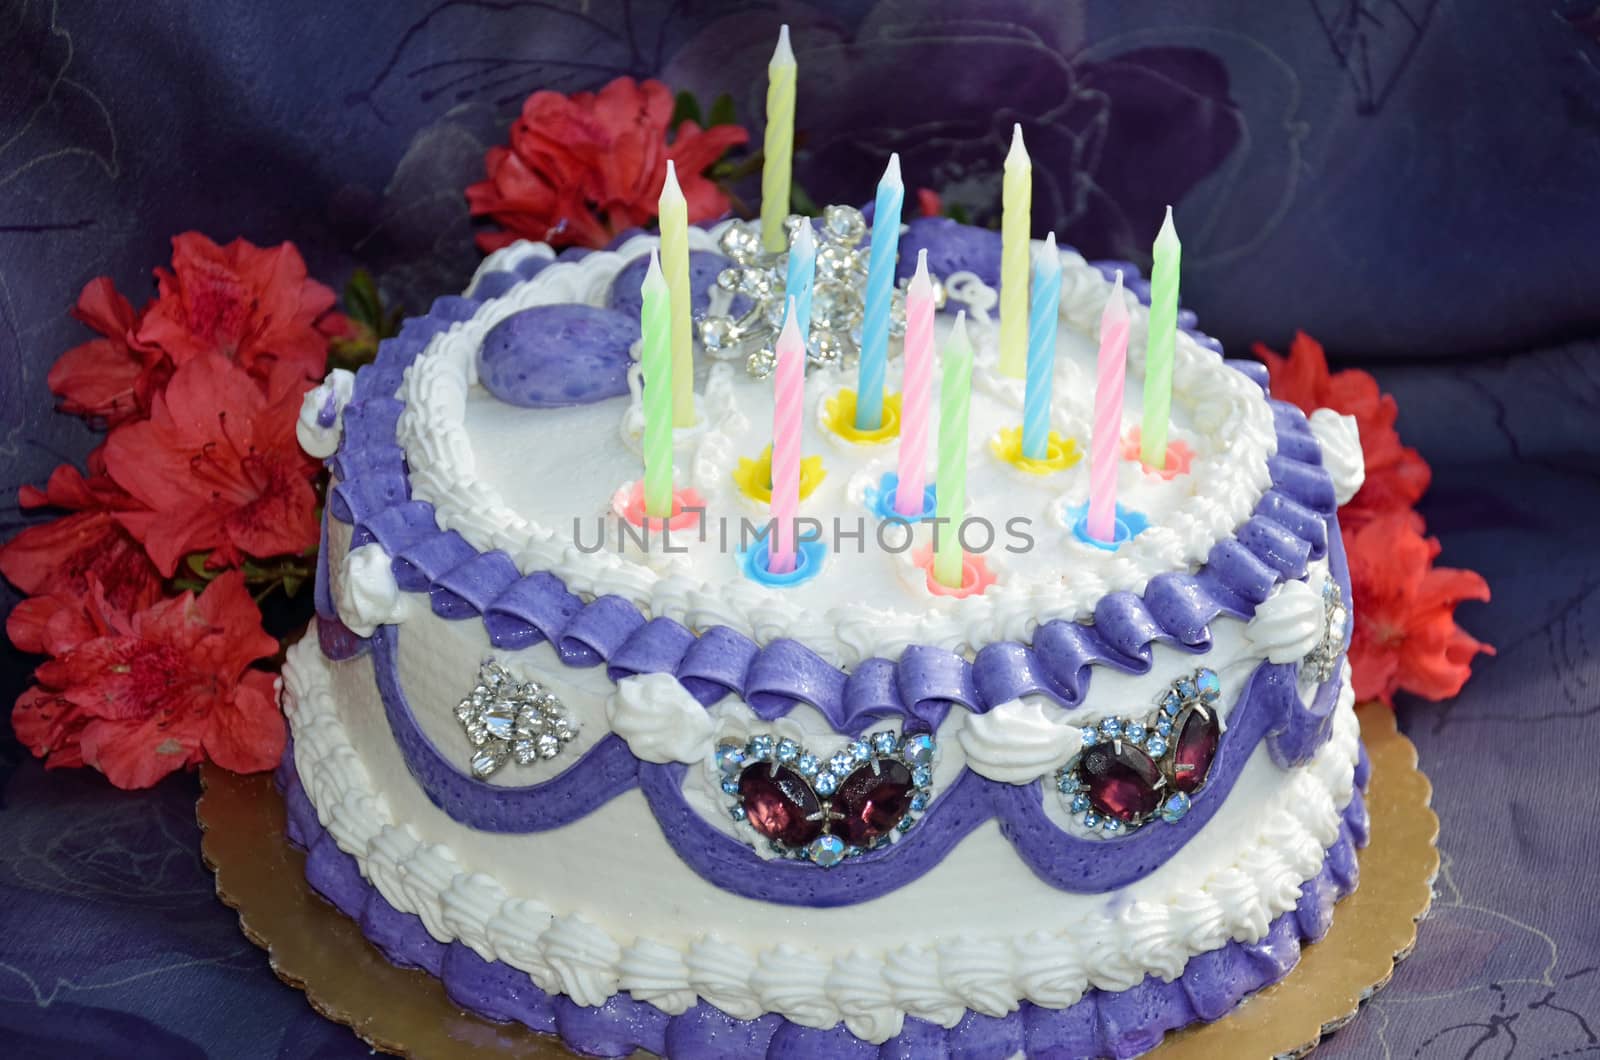 A birthday cake iced in white and purple frosting and decorated with candles and embedded gifts of jewelry